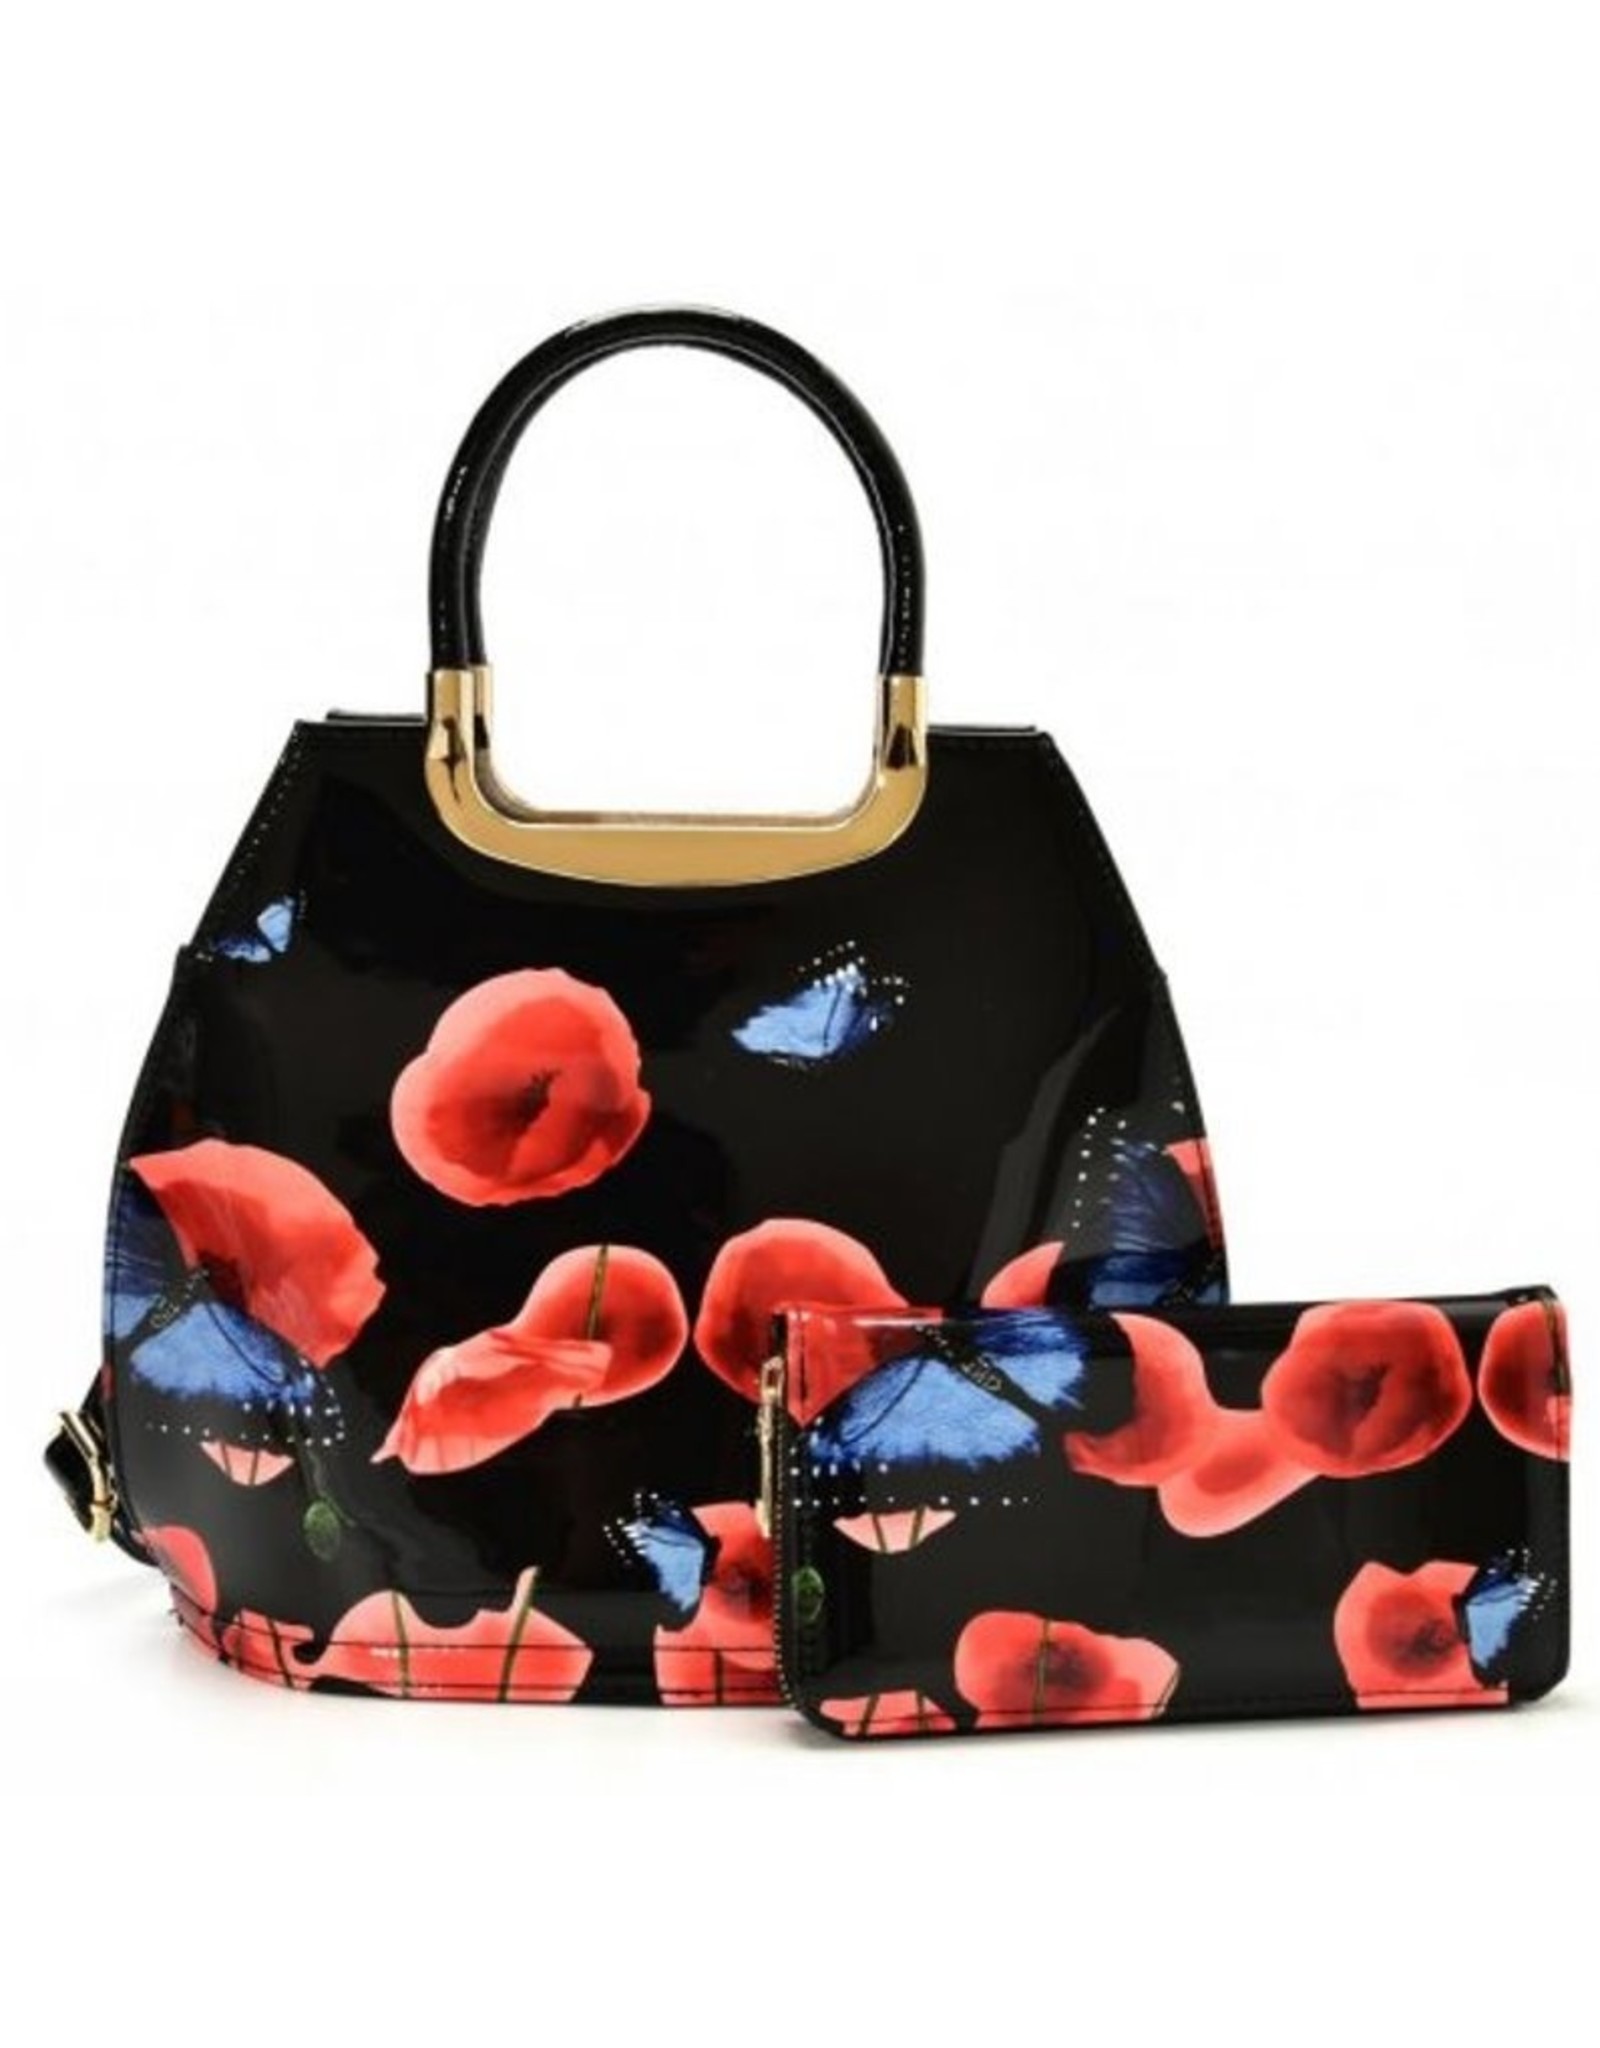 Trukado Fashion bags - Lacquer Handbag Vintage Butterfly witht Free Wallet black